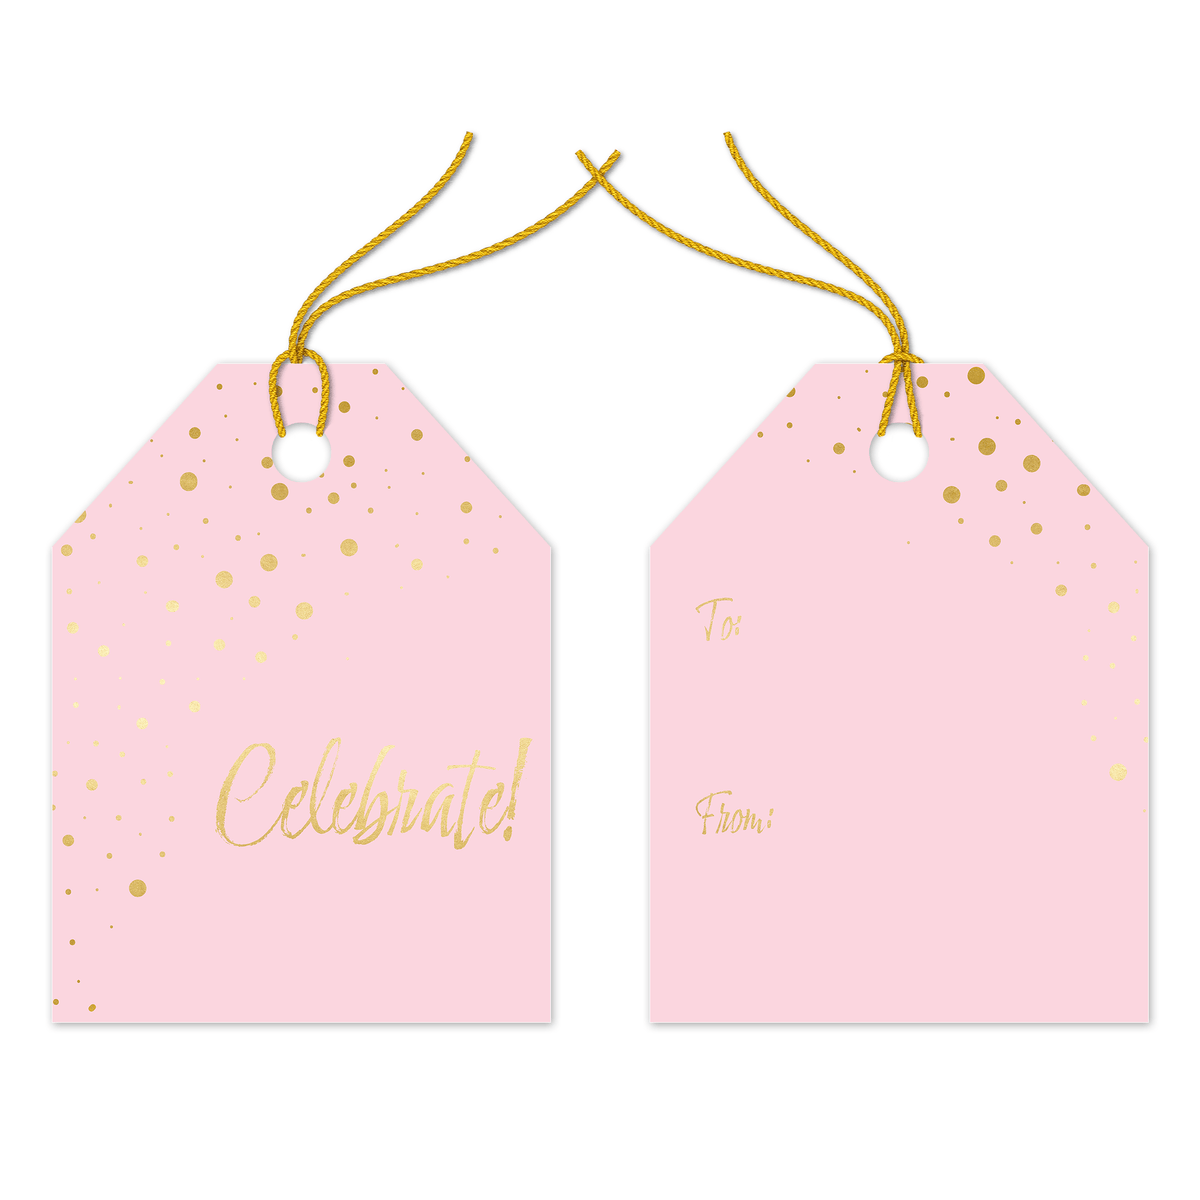 Celebrate pink golden Gift Tags Pro Supply Global